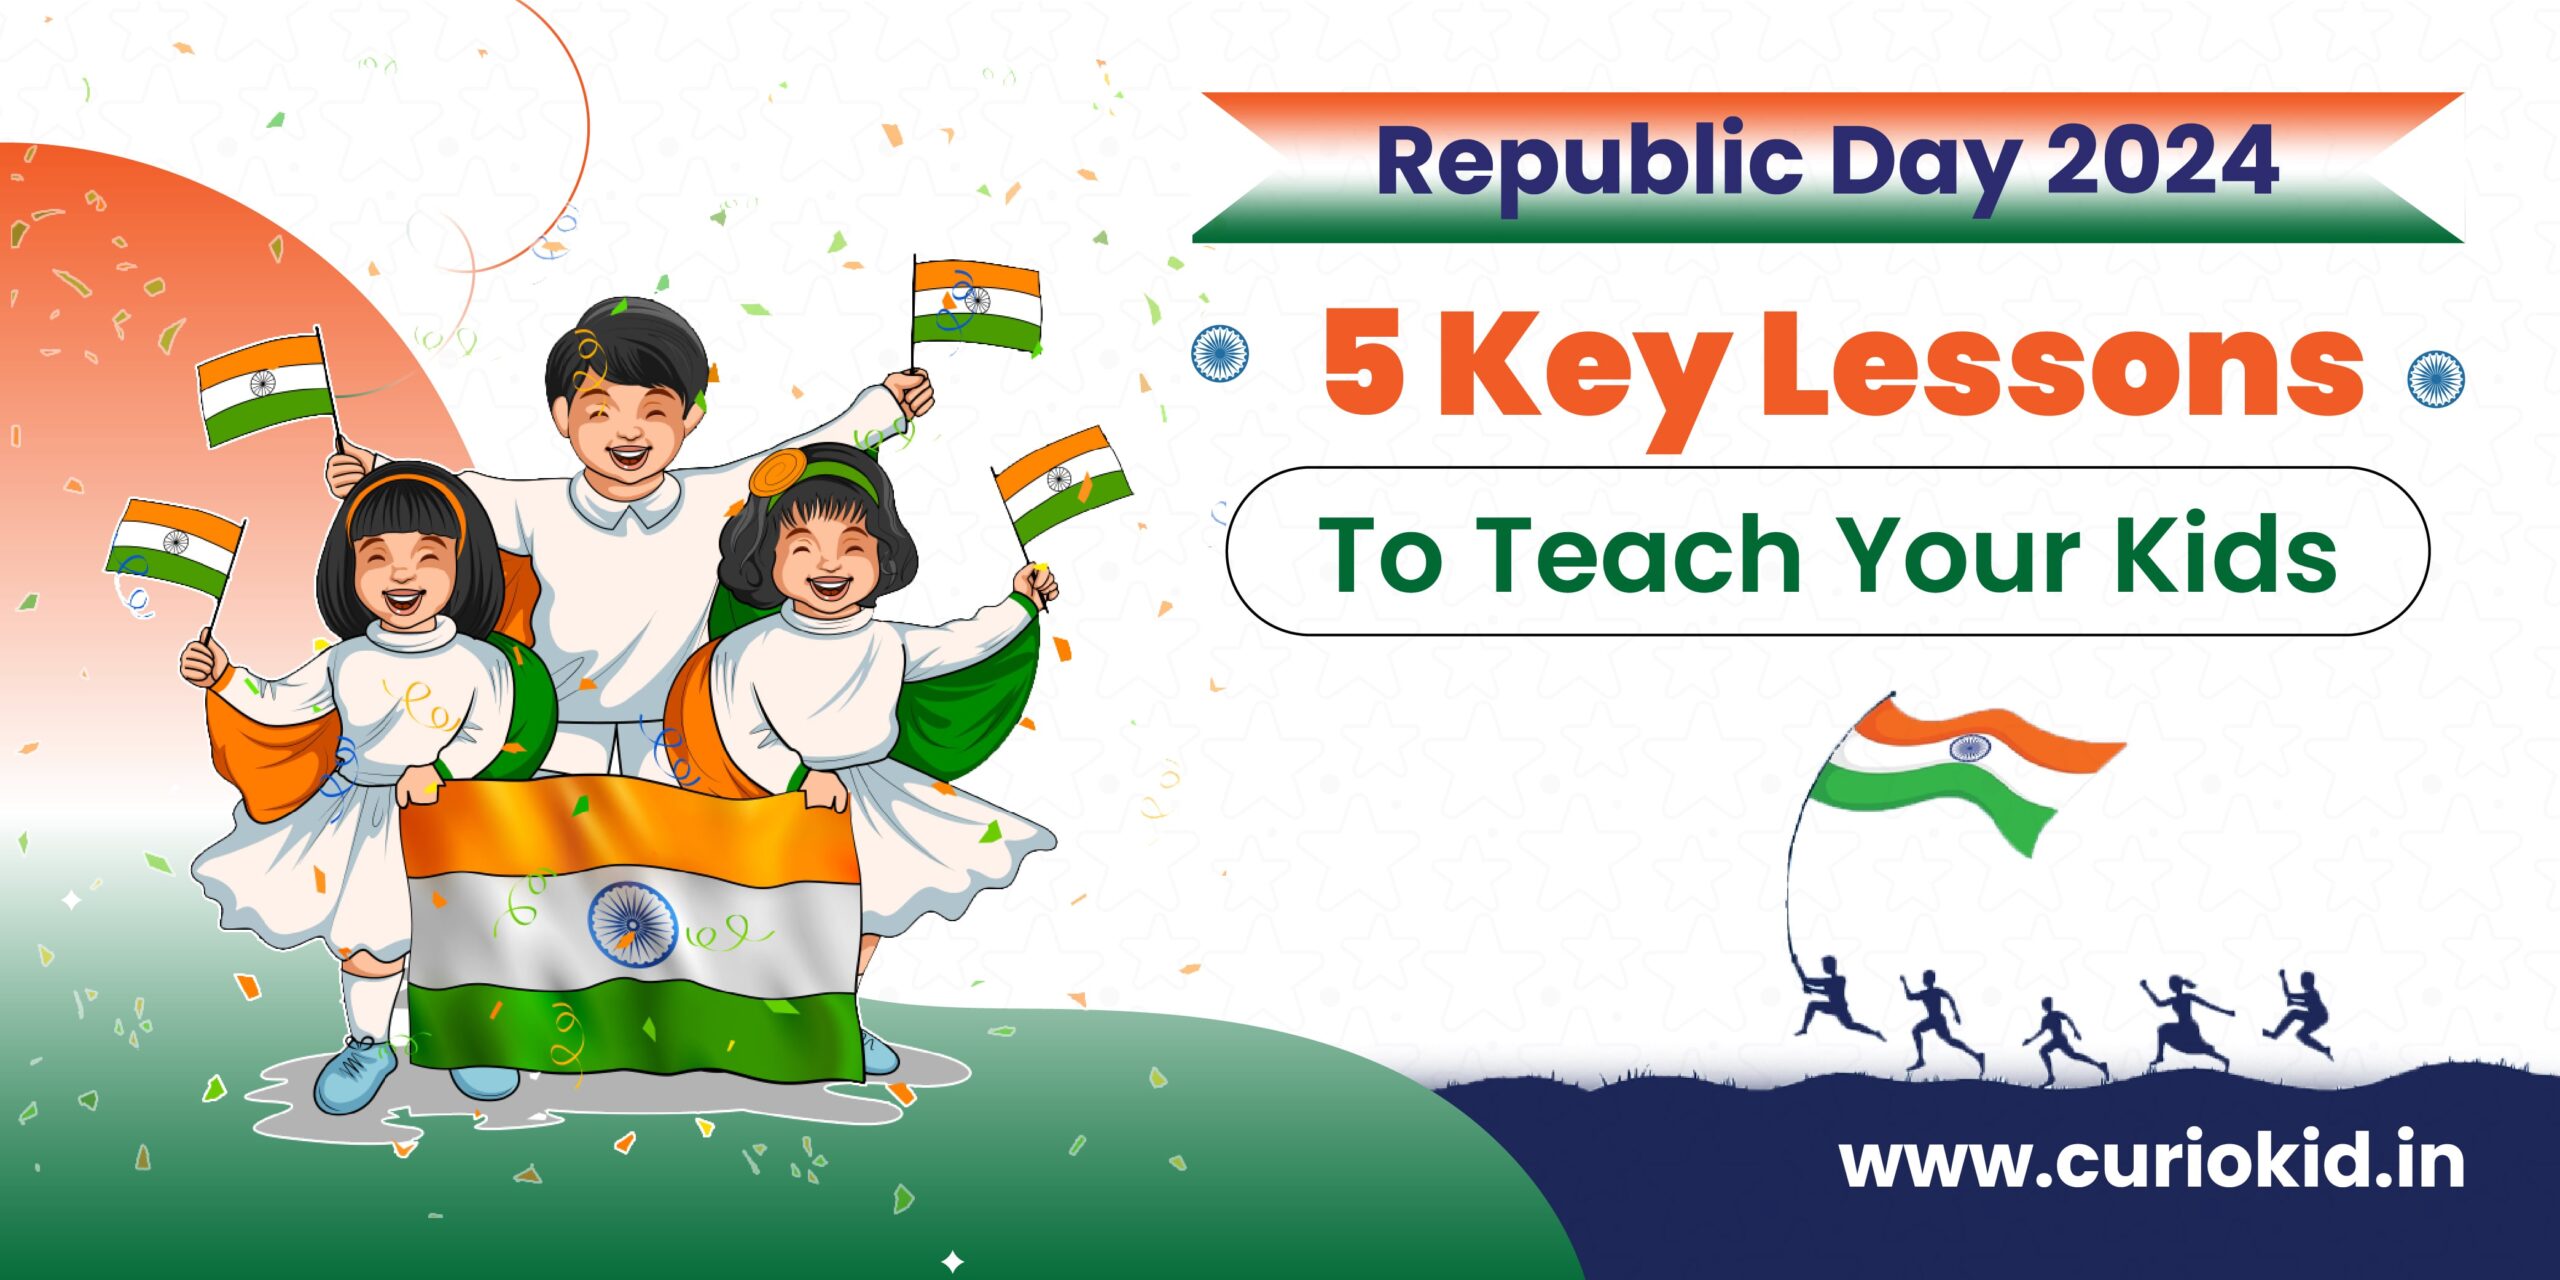 Republic Day 2024: 5 Key Lessons To Teach Your Kids